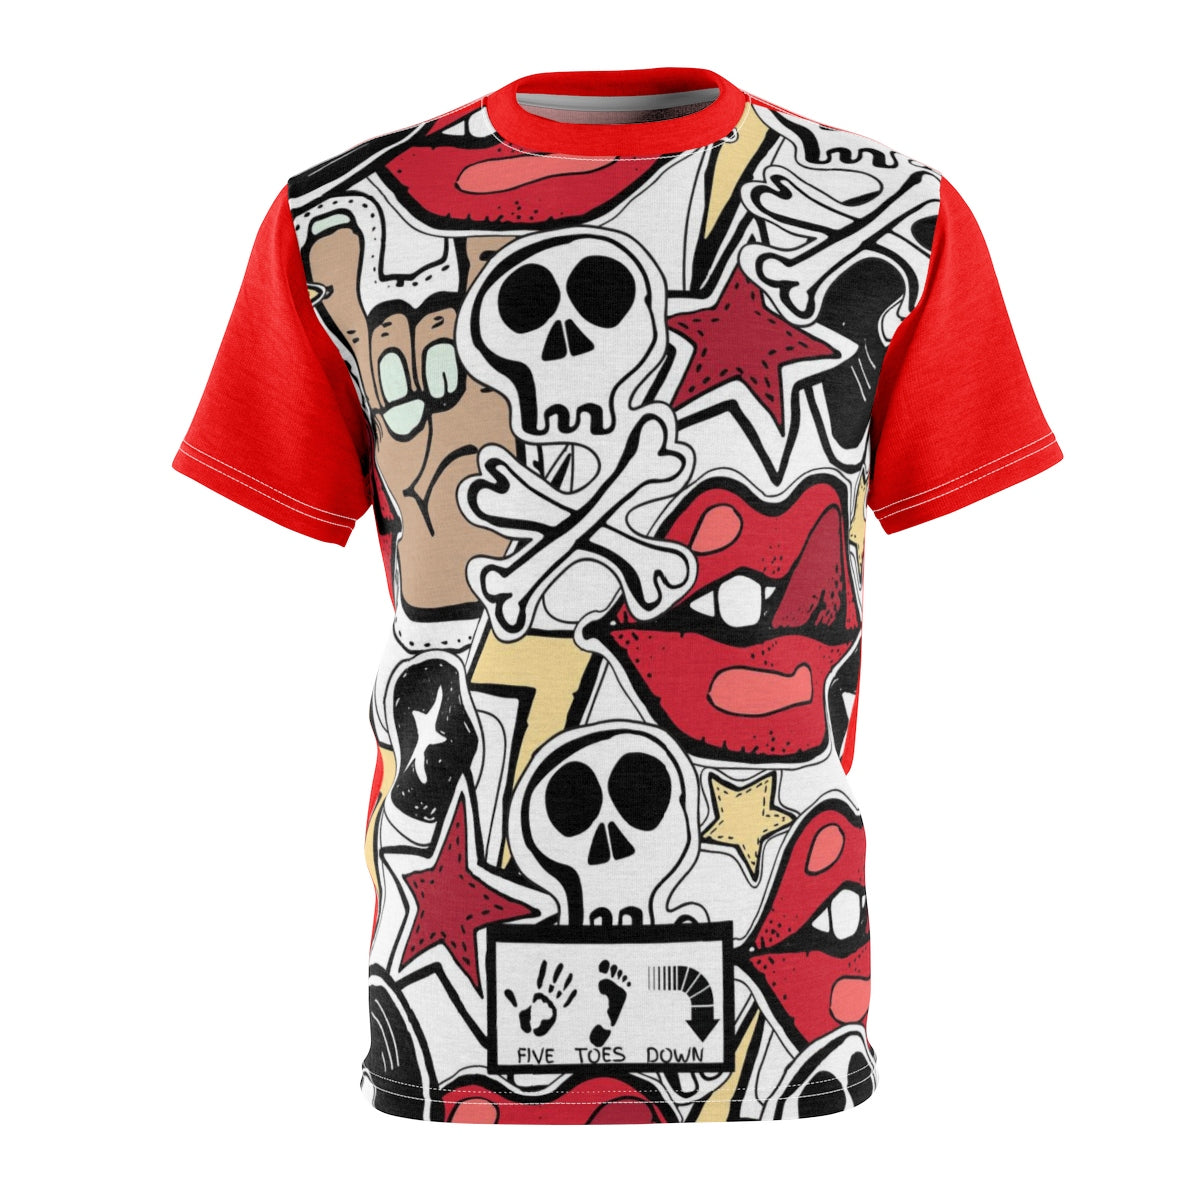 Five Toes Down Crazy Pattern Unisex Cut & Sew Tee